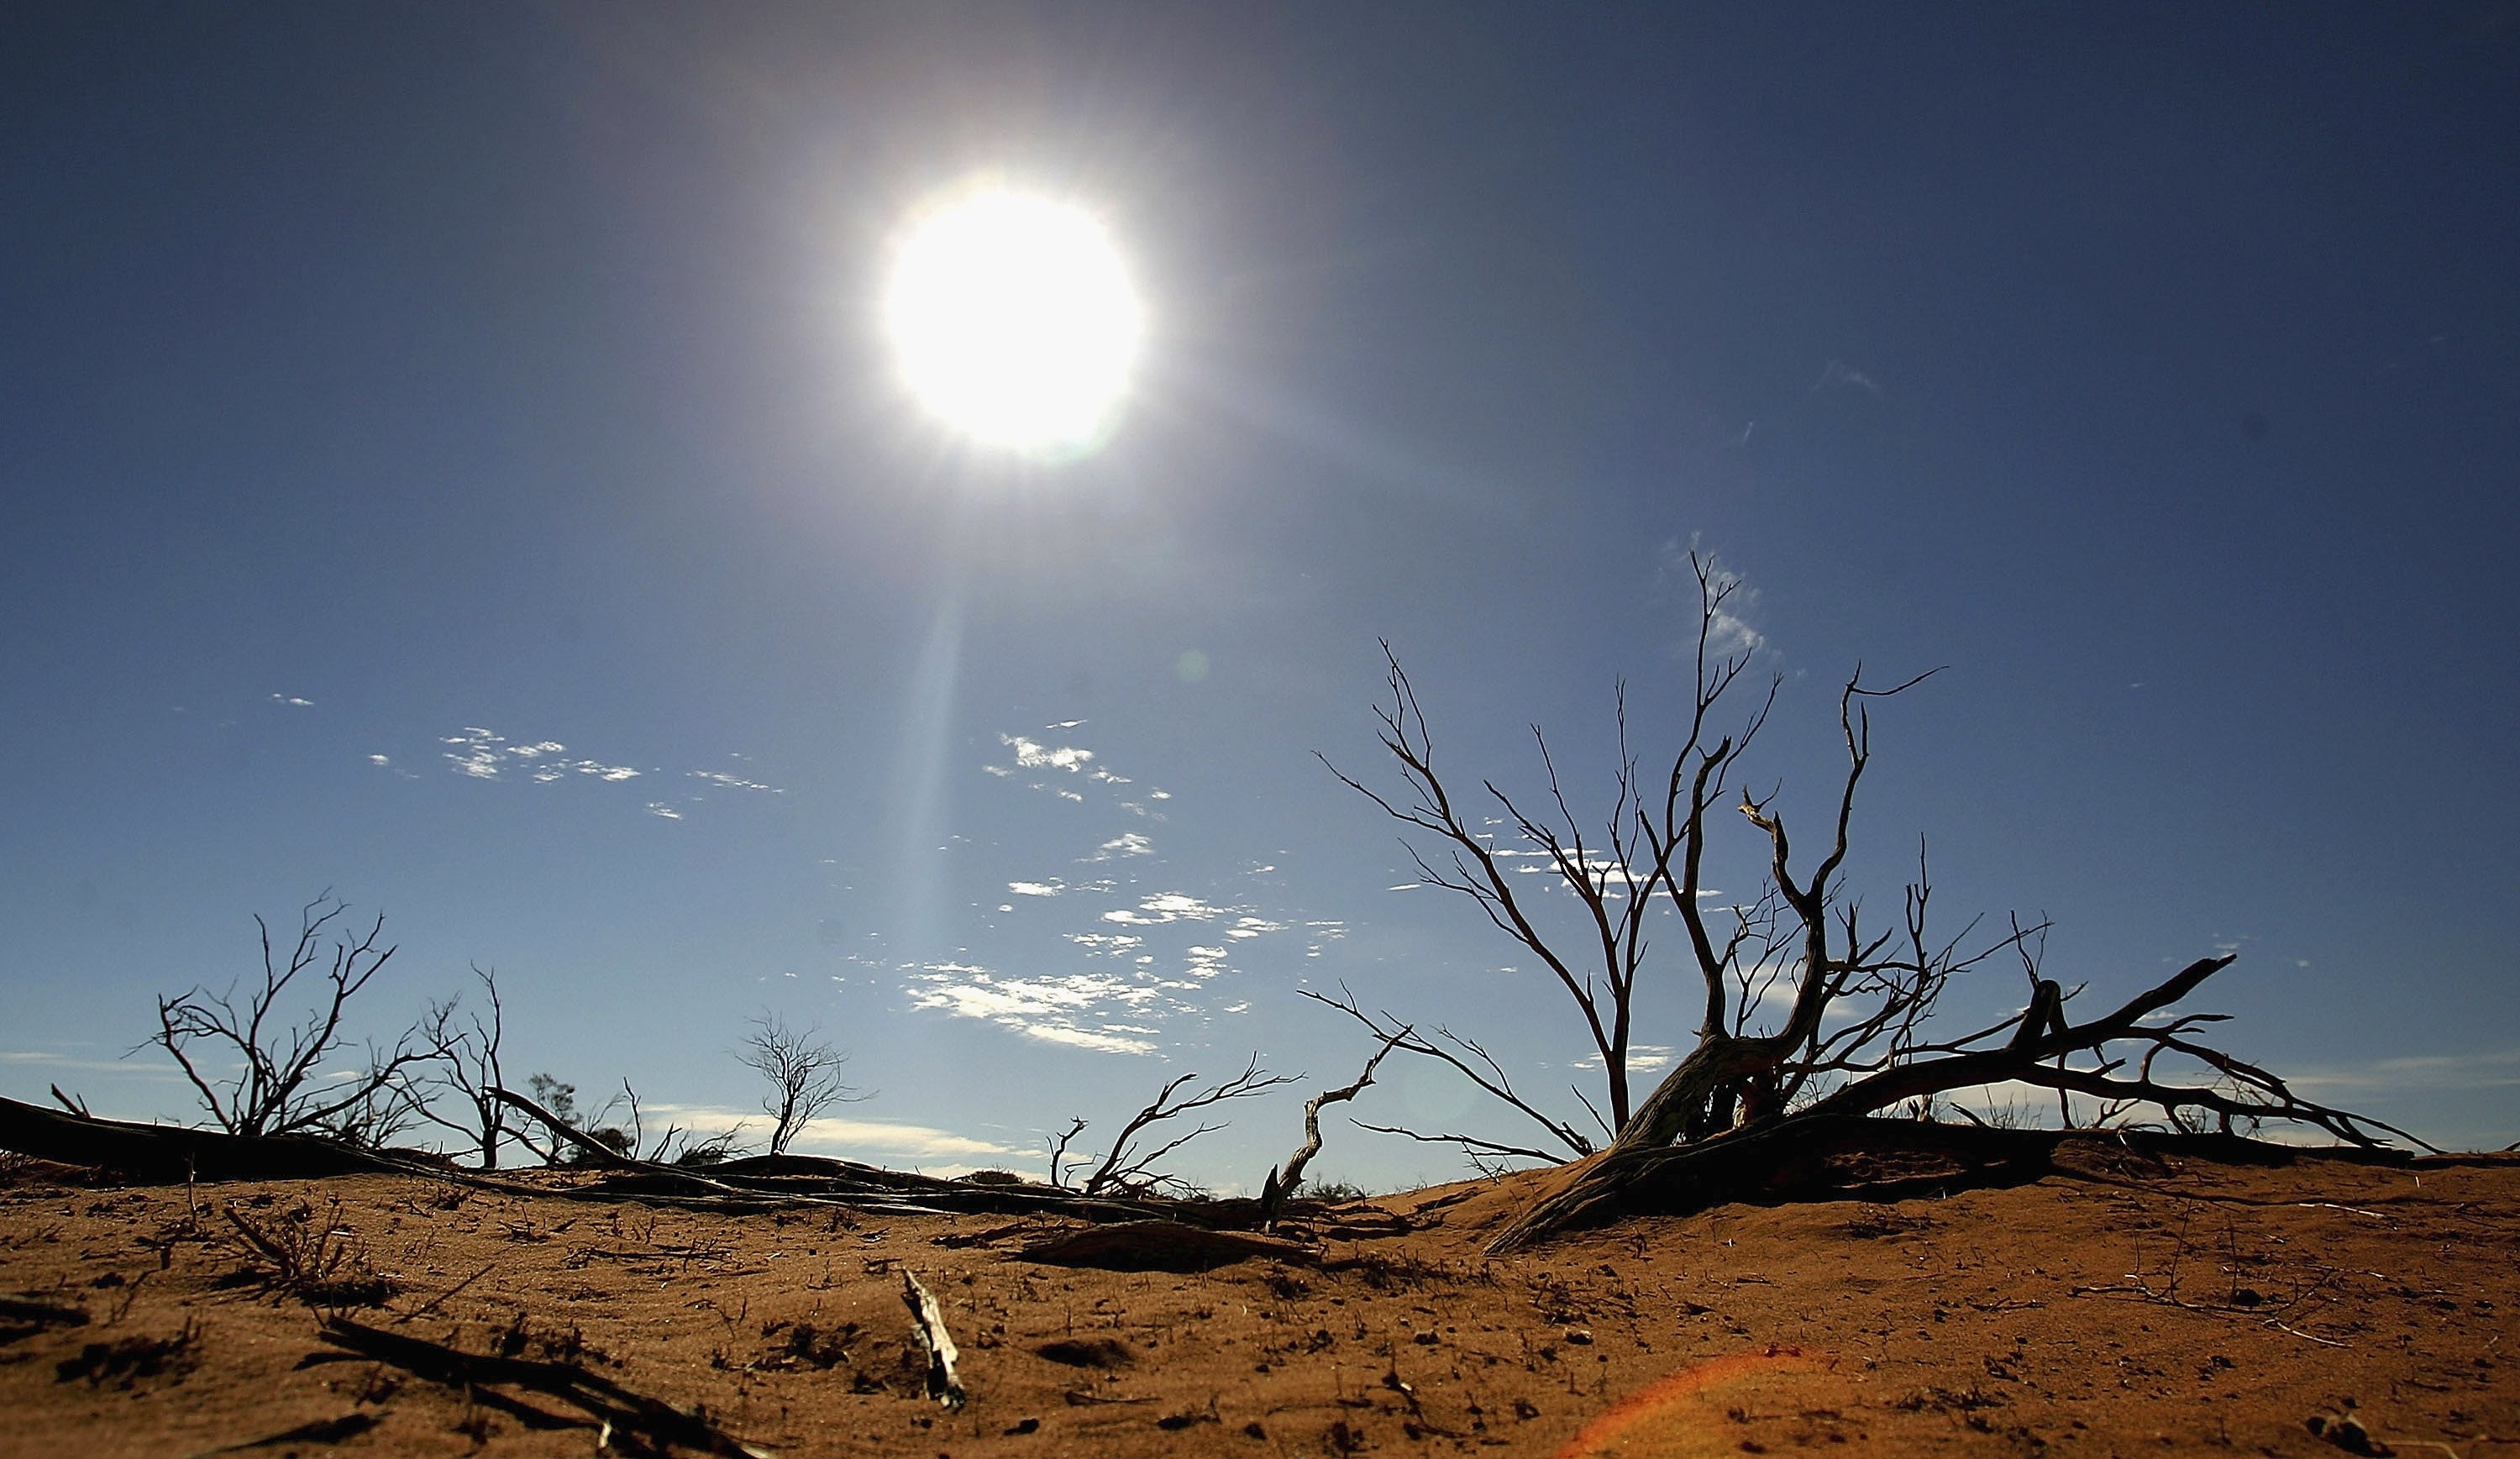 A temperature increase of 2C could lead to increased heatwaves as well as sea level rises